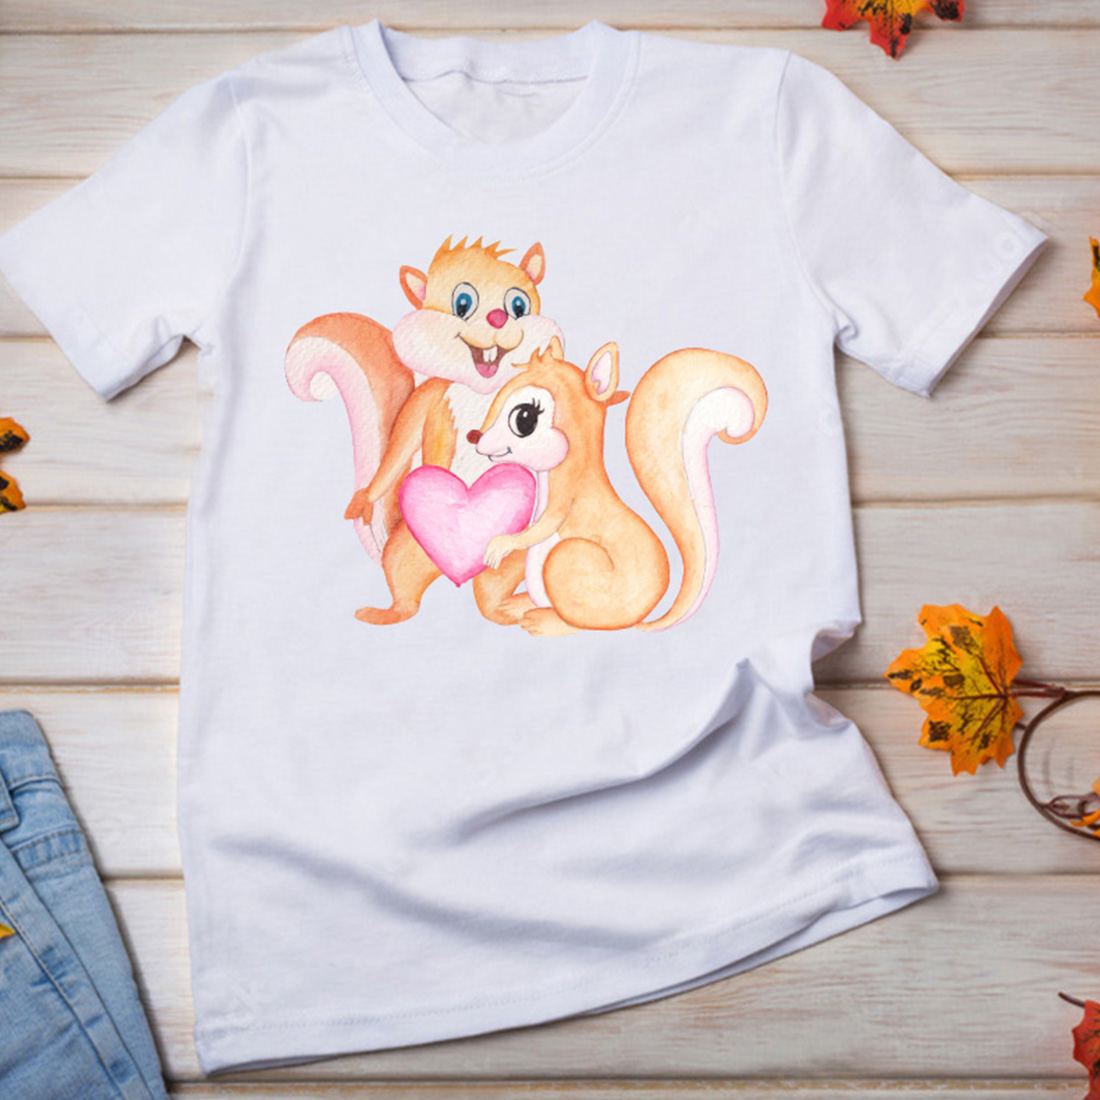 Two watercolor squirrel on a white t-shirt.